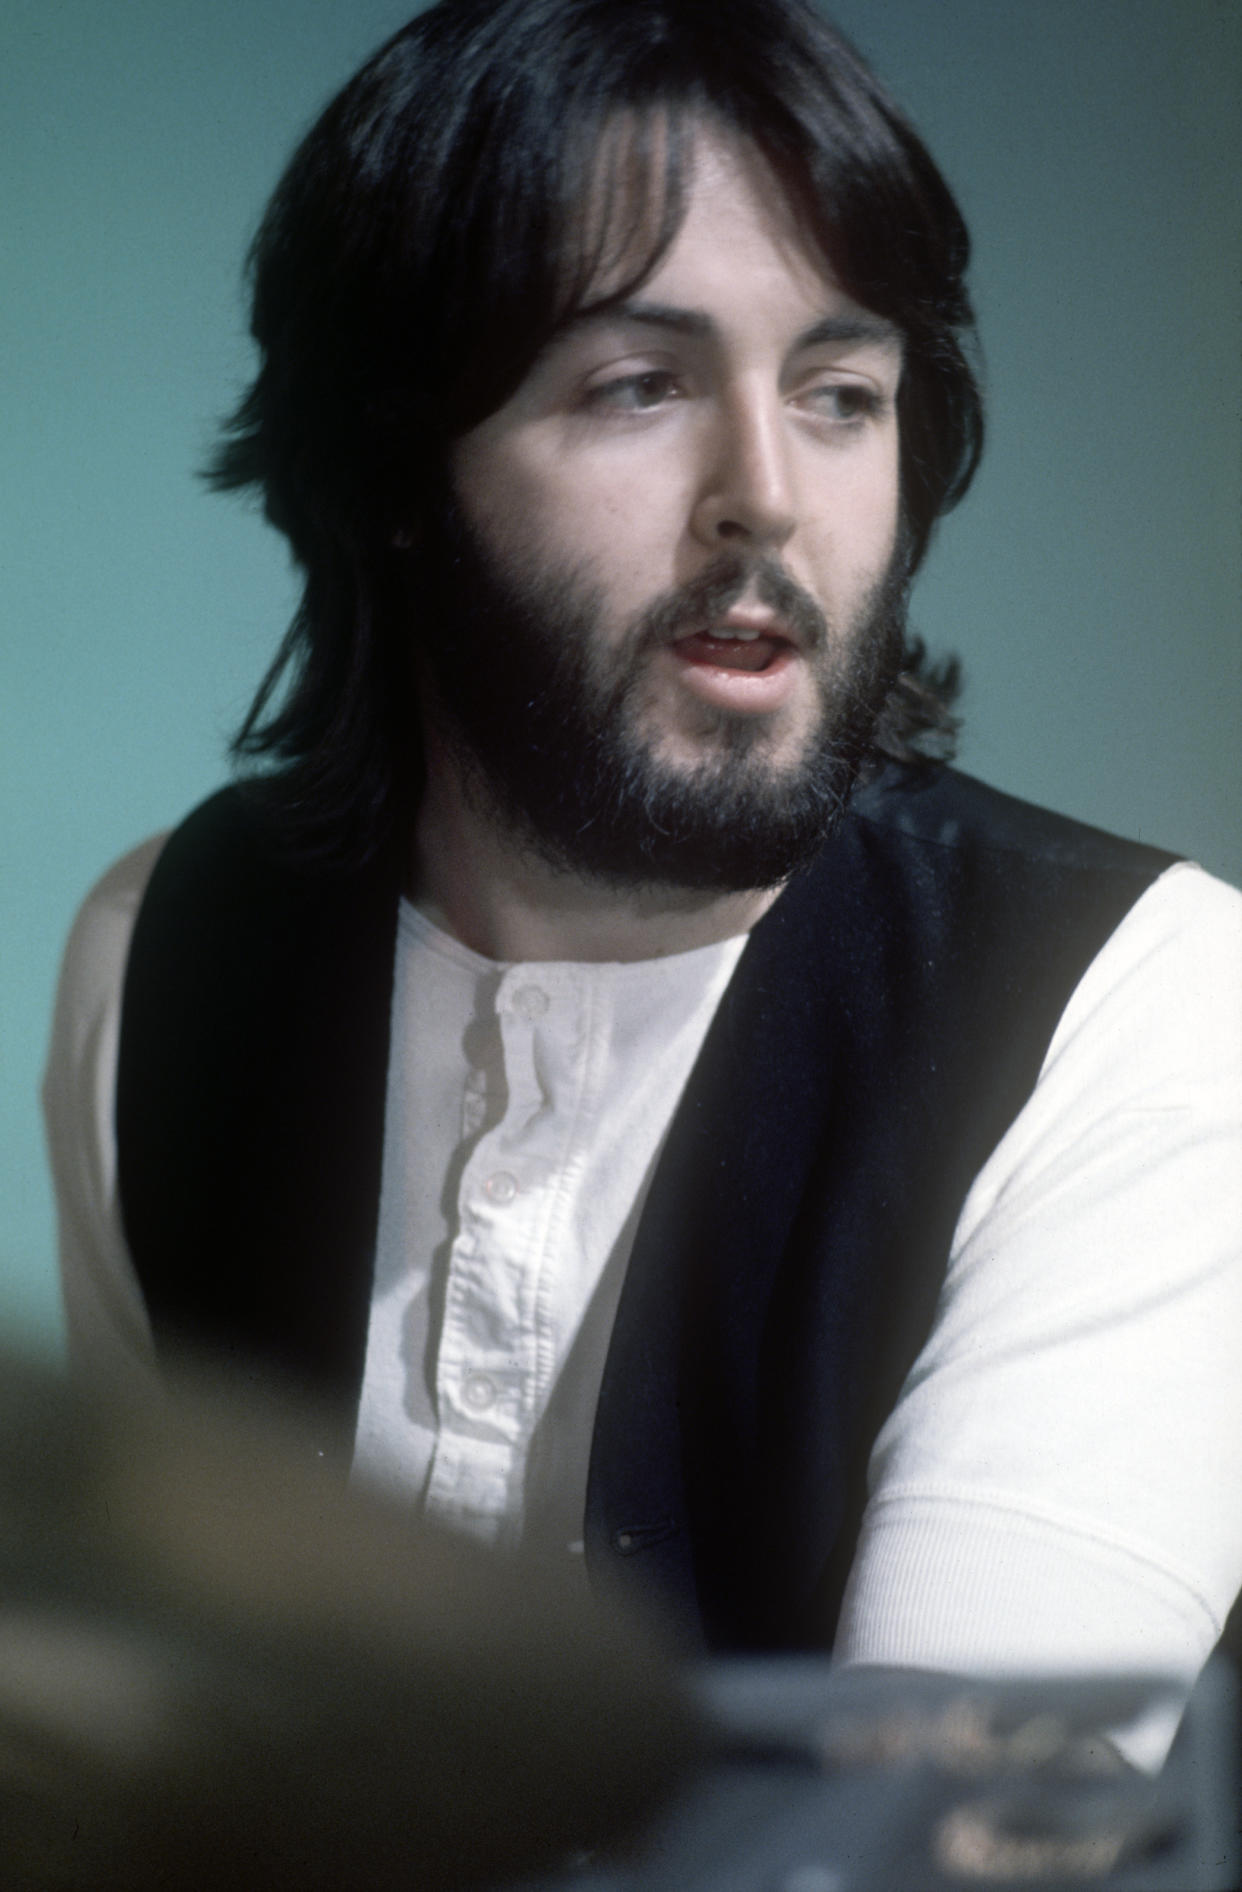 McCartney was the driving force behind getting the band to record new music at a time when they were spreading their wings personally and professionally. 